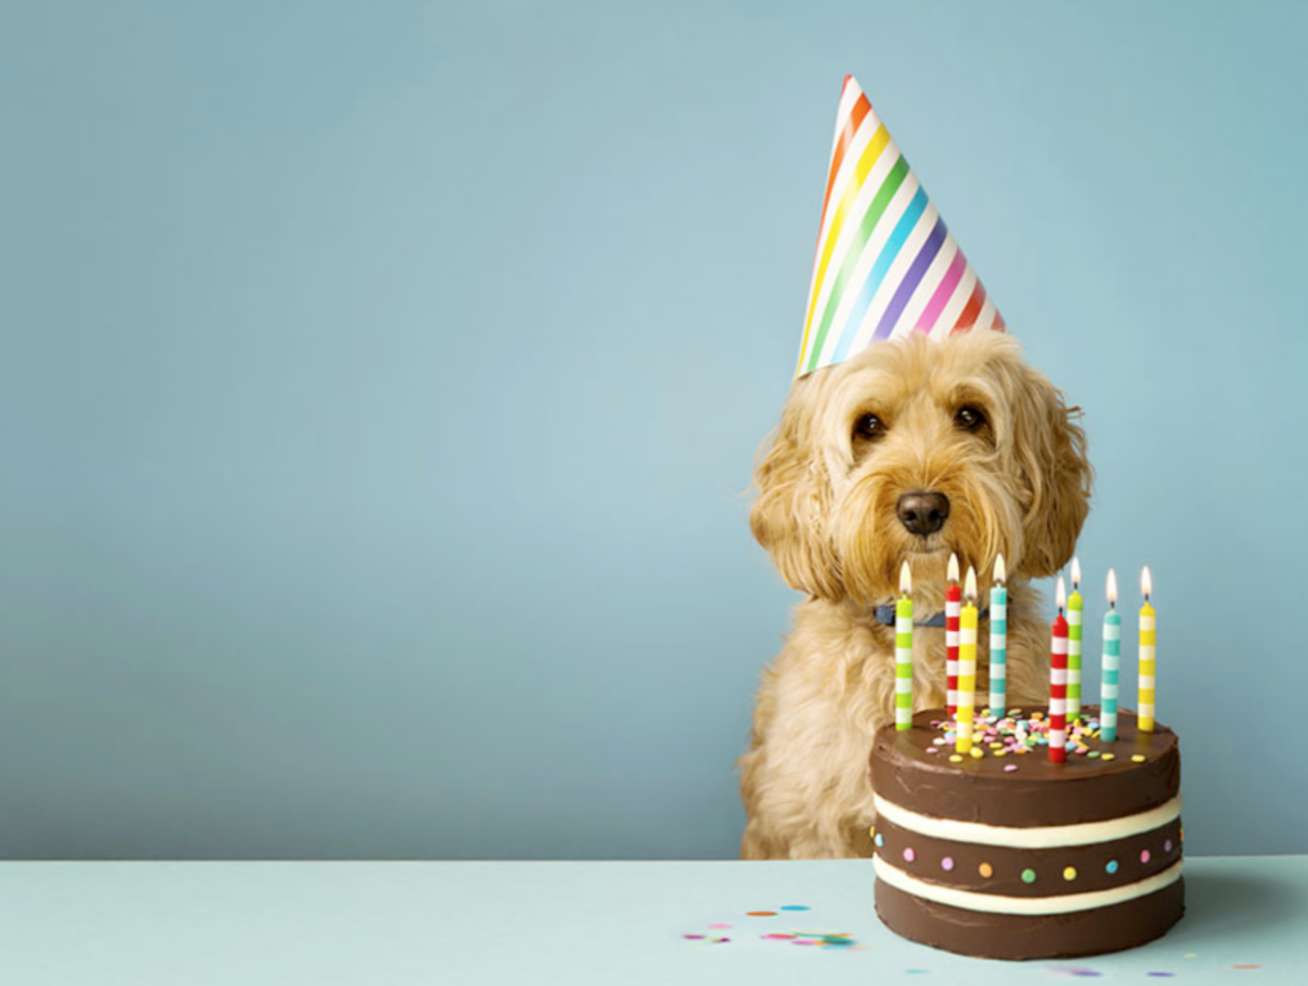 A blonde dog sits at a table with a birthday cake and a colorful party hat